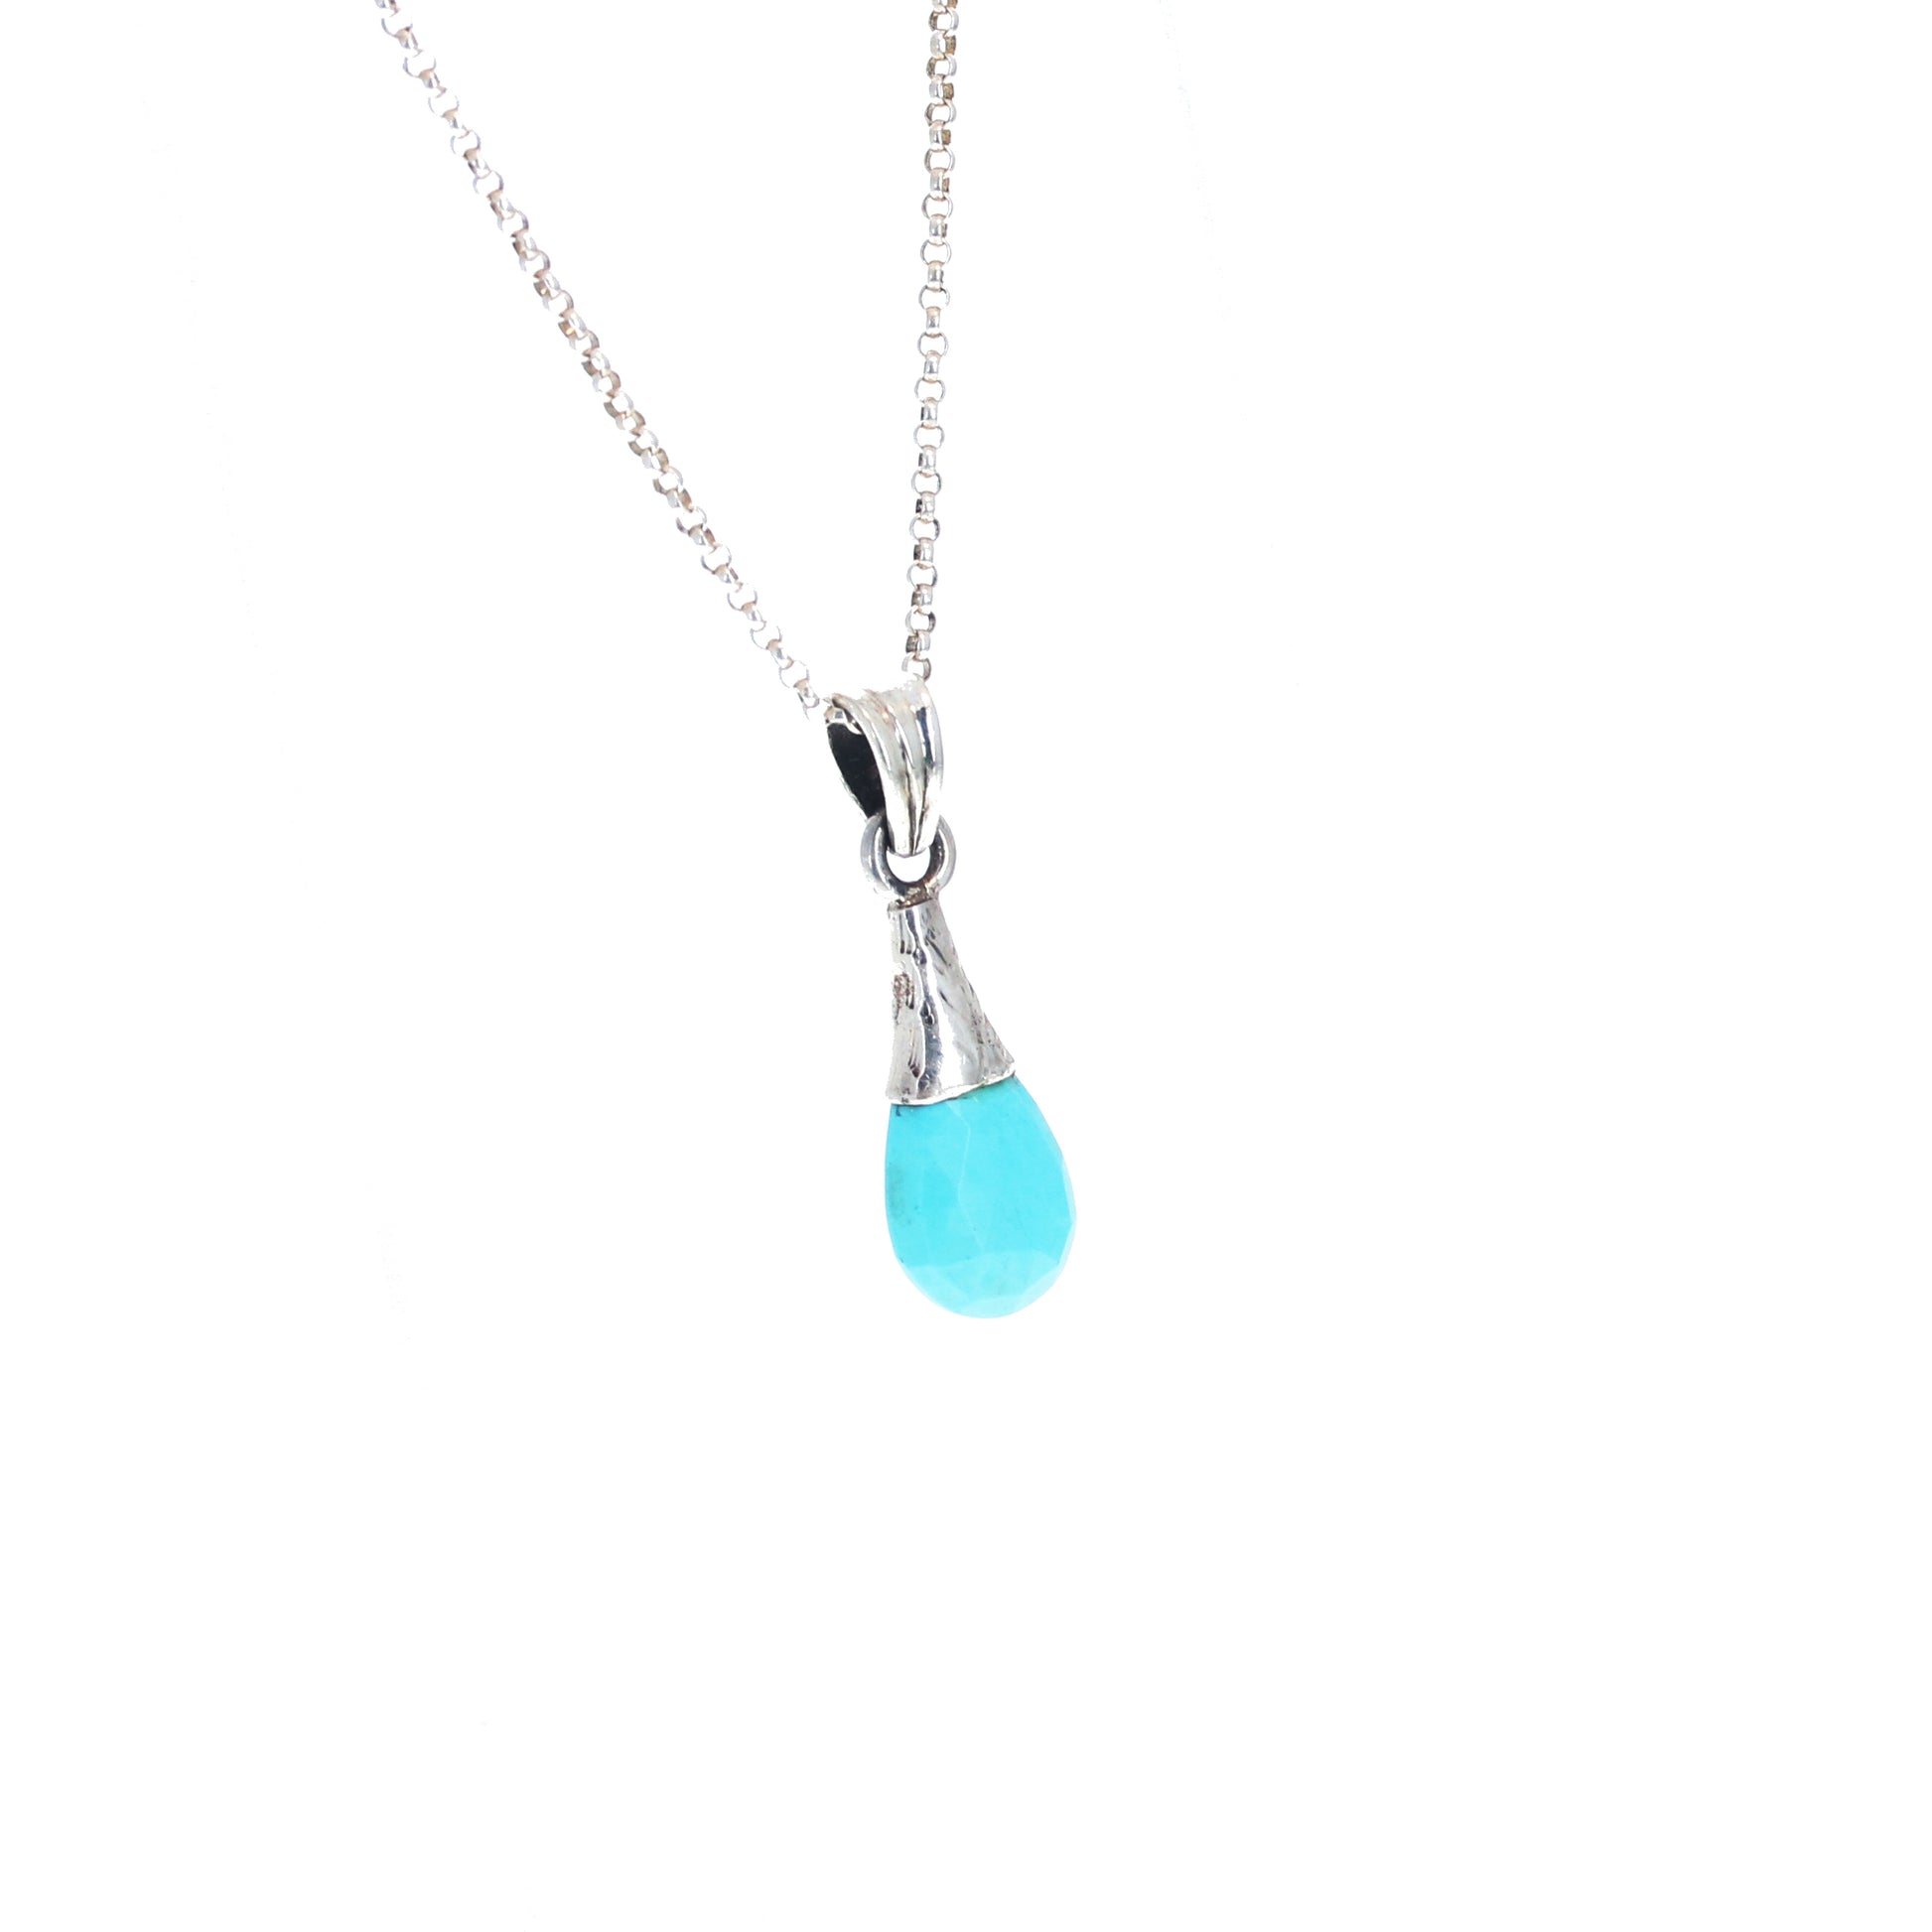 SLEEPING BEAUTY Turquoise Sterling Silver Faceted Pendant 18" -NewWorldGems